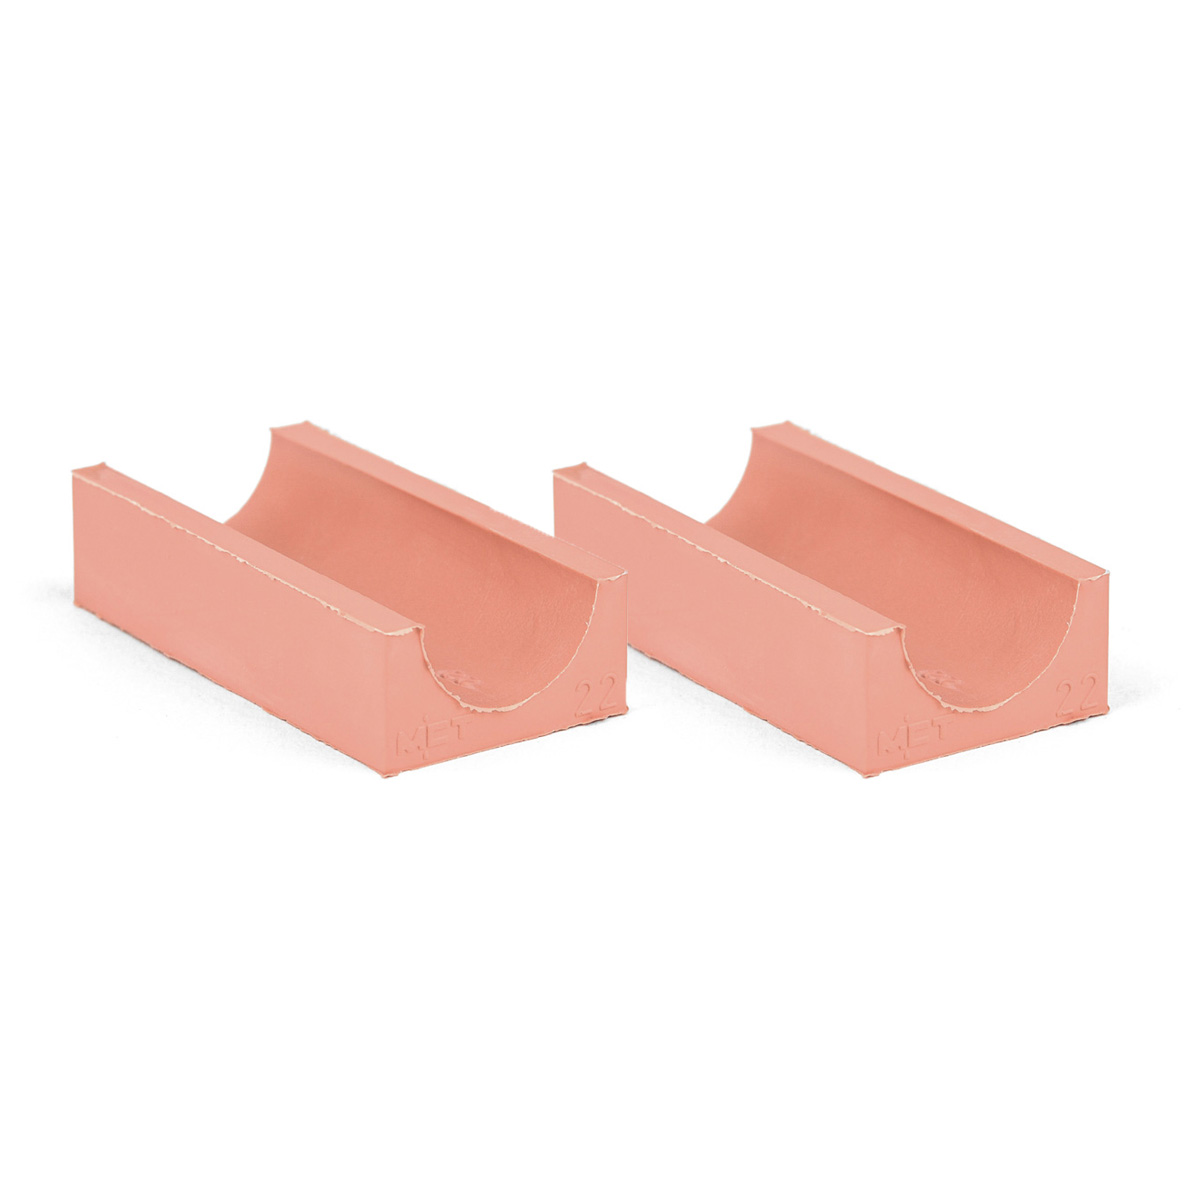 30-22*2 Set of 2 half insert block lycron, 30-22 for cable/pipe diam. 21.5-22.5mm